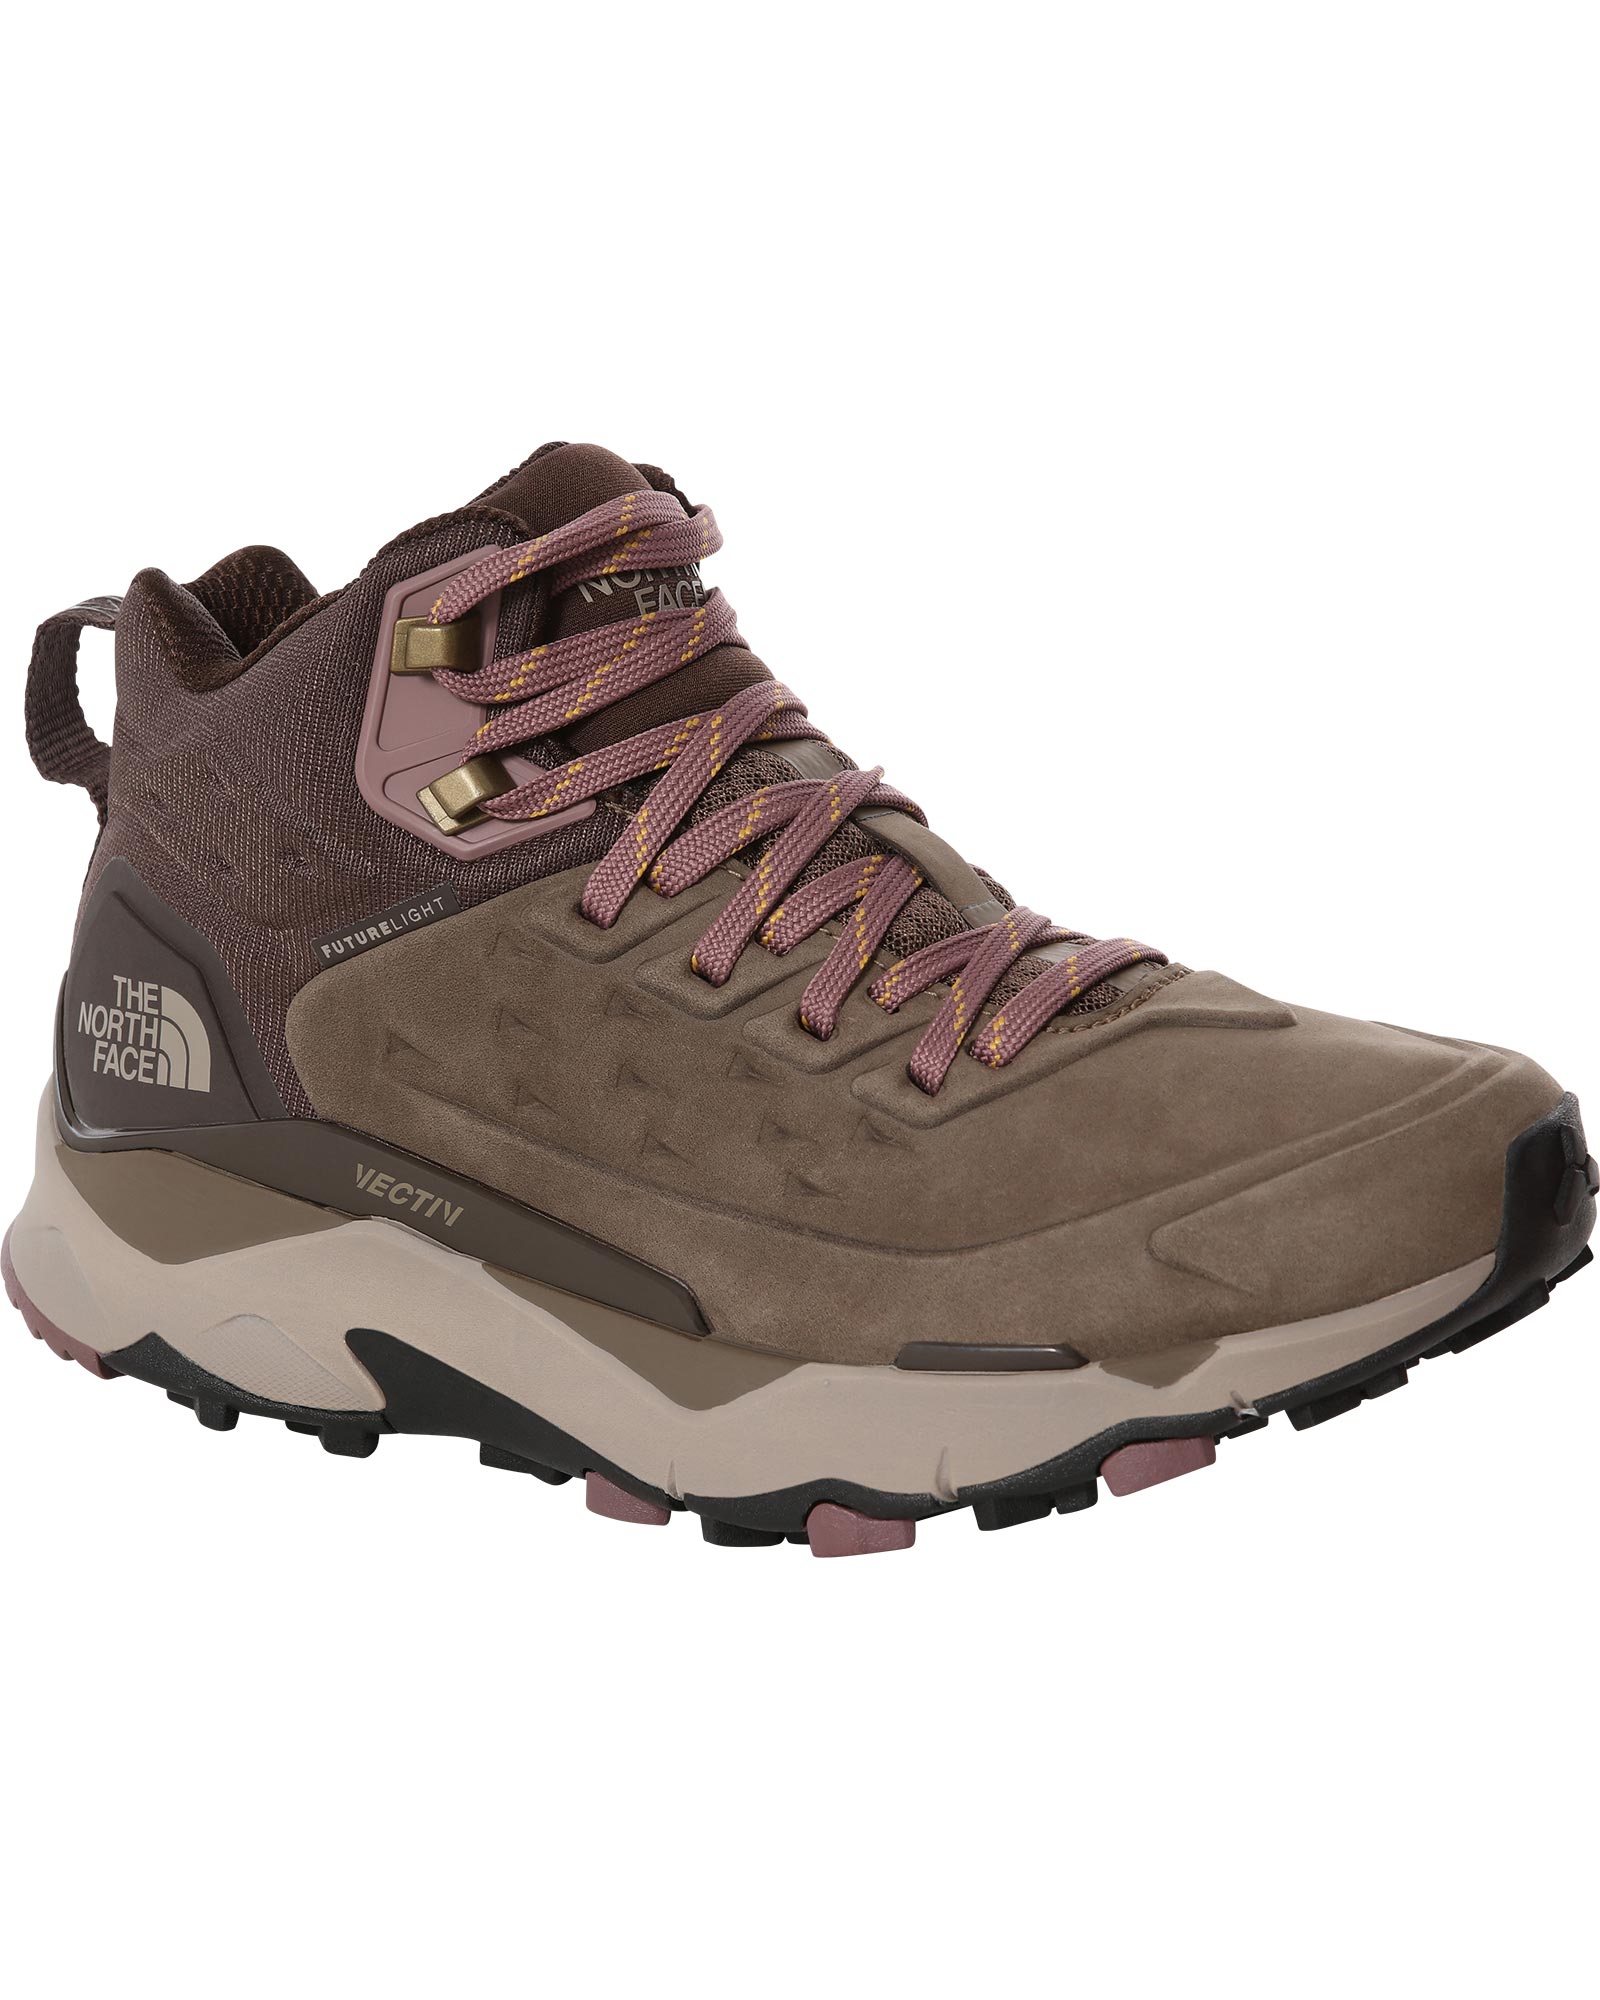 The North Face Vectiv Exploris Leather Mid FUTURELIGHT Women’s Boots - Bipartisan Brown/Coffee Brown UK 4.5